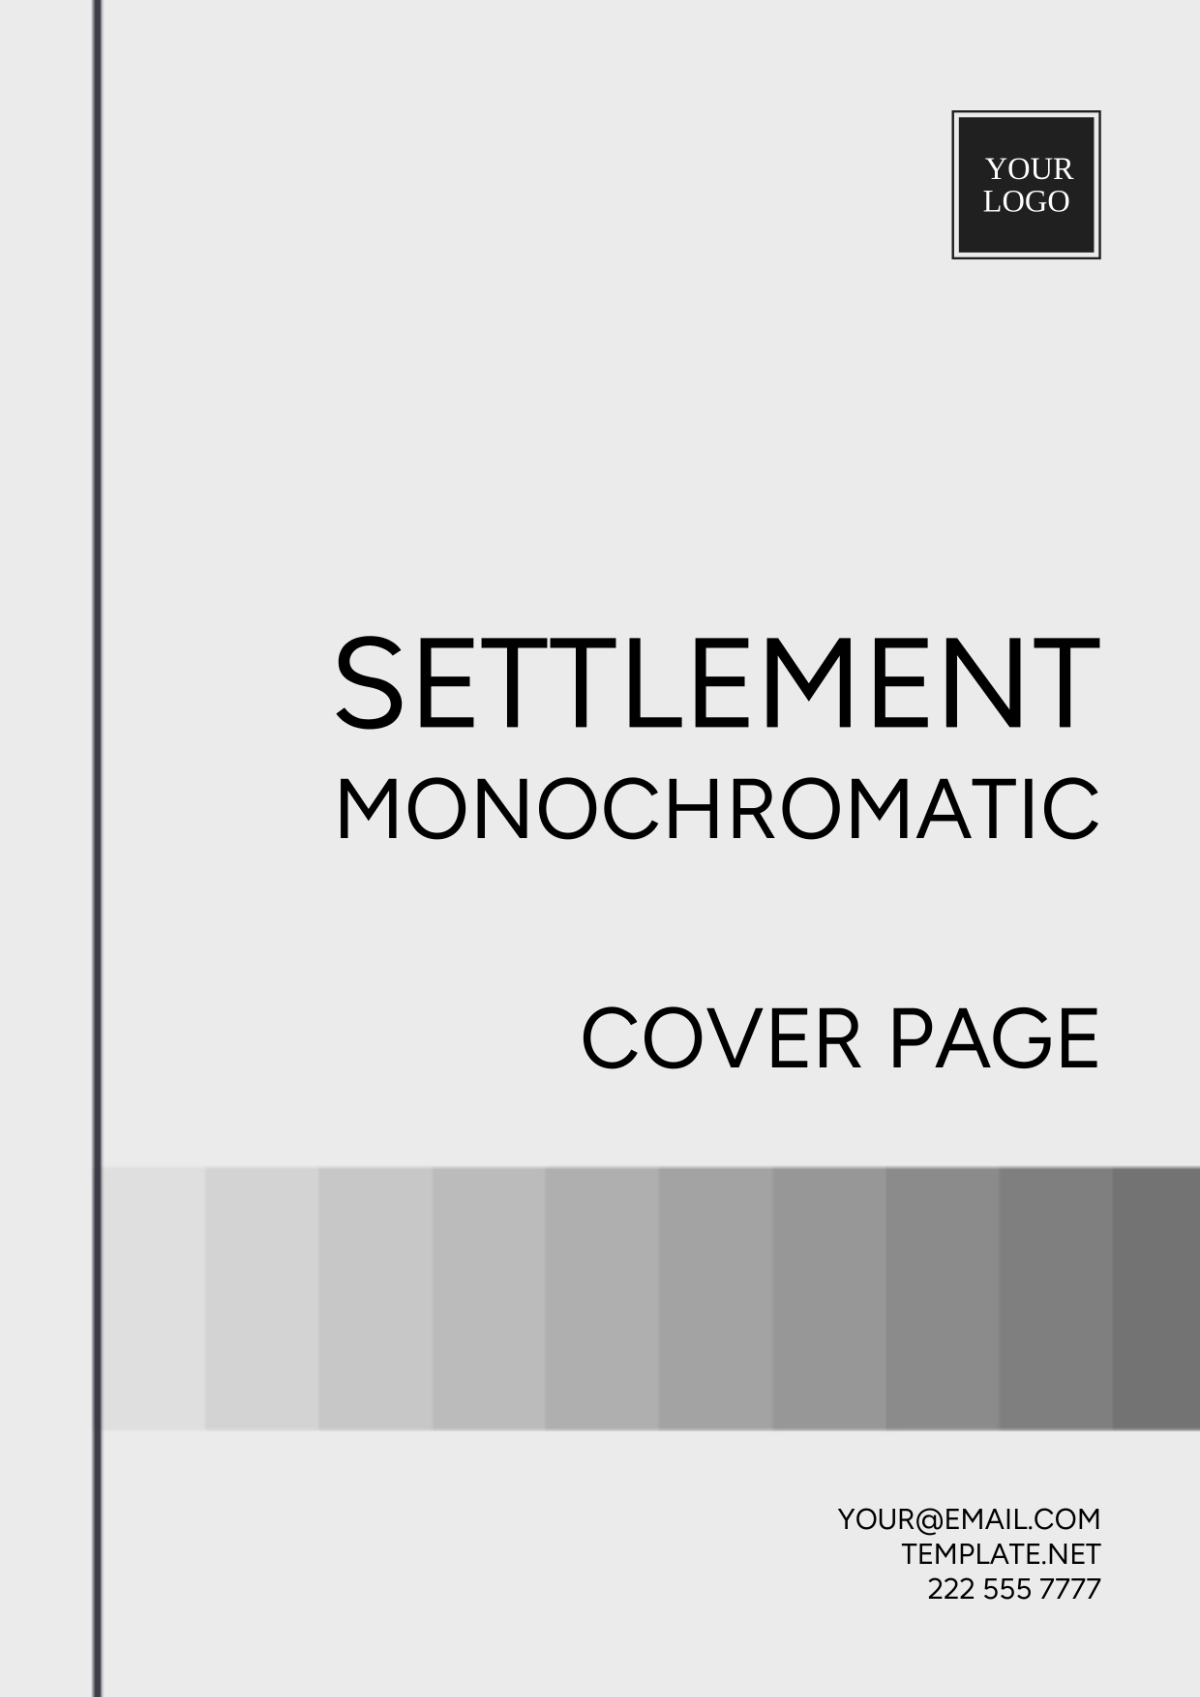 Settlement Monochromatic Cover Page